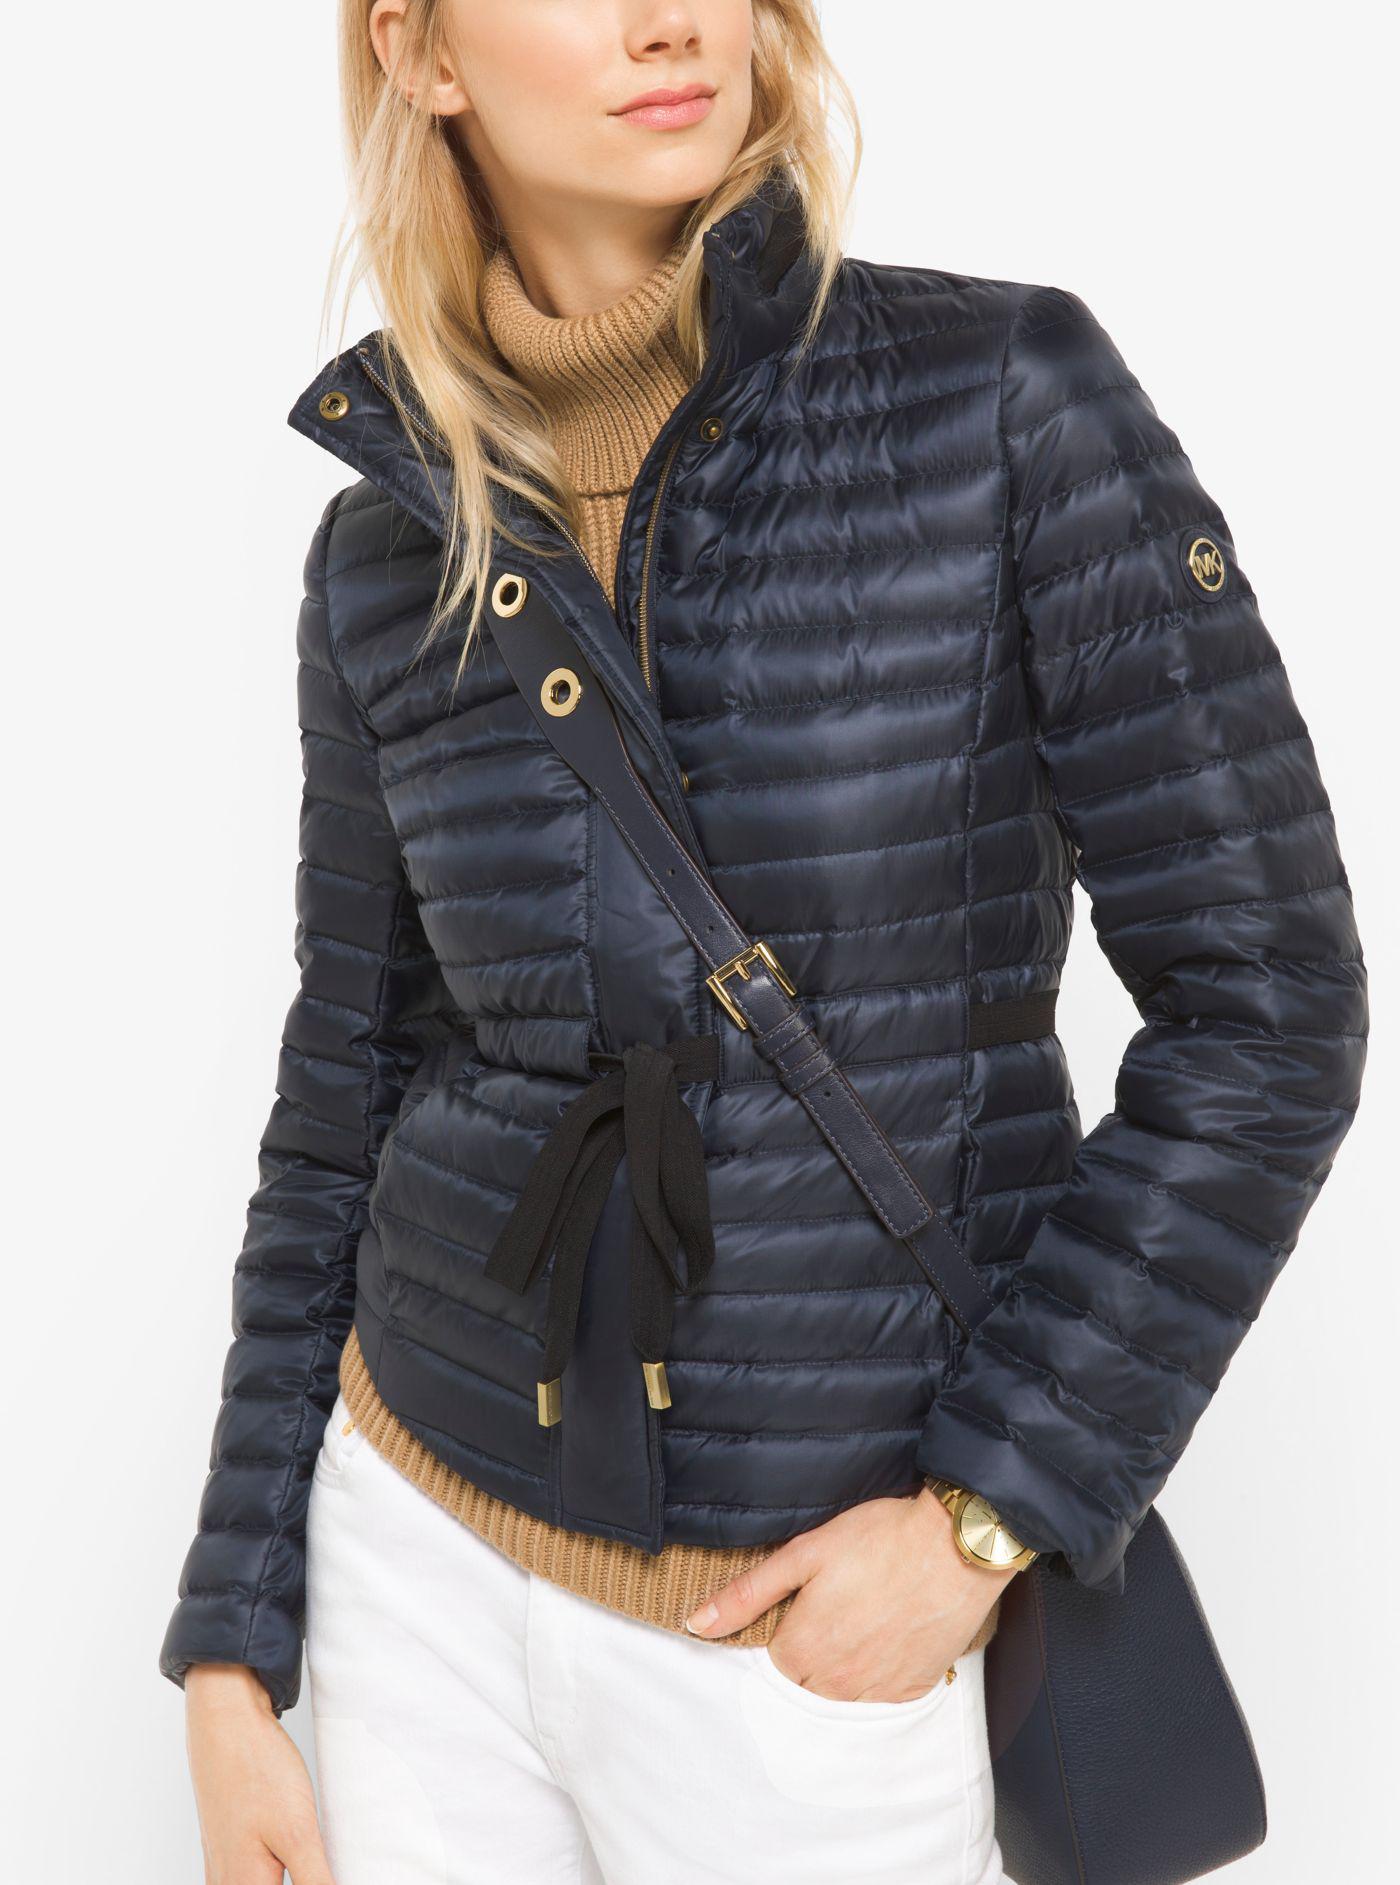 Michael Kors Synthetic Packable Nylon Puffer Jacket in Navy (Blue) - Lyst